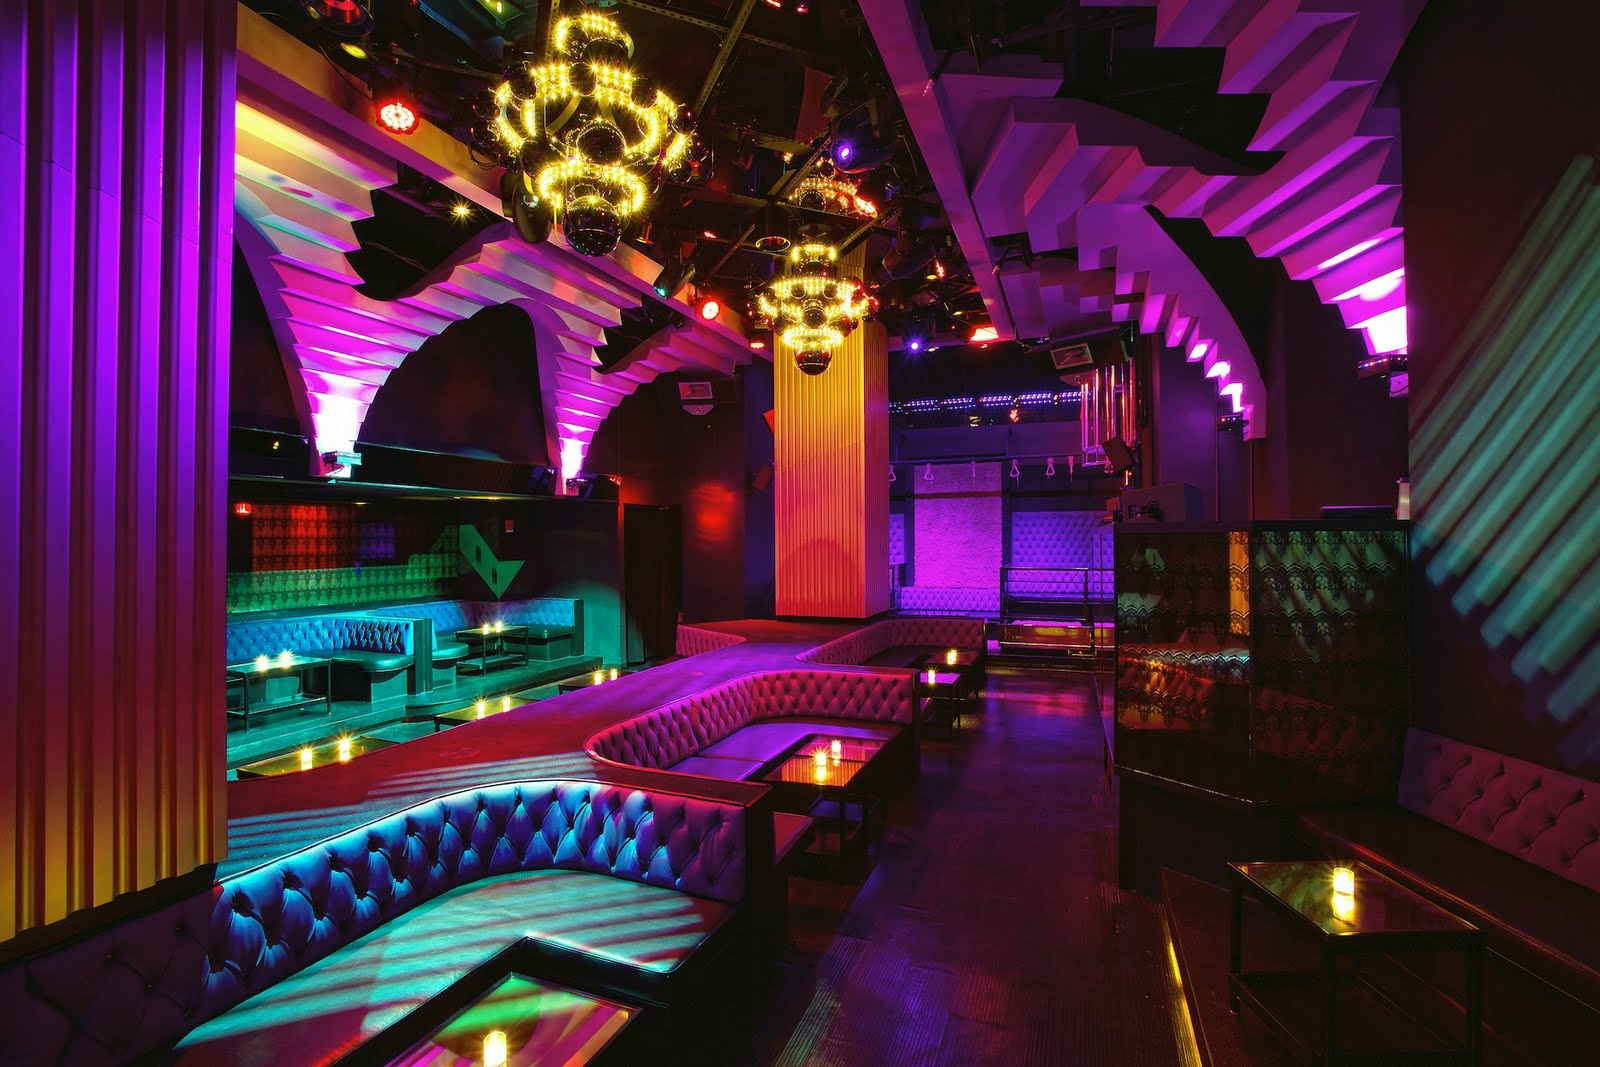 braxton and yancey: ﻿Fantastic Modern Night Clubs, Bars and Restaurants - A Riot of Light, Color ...